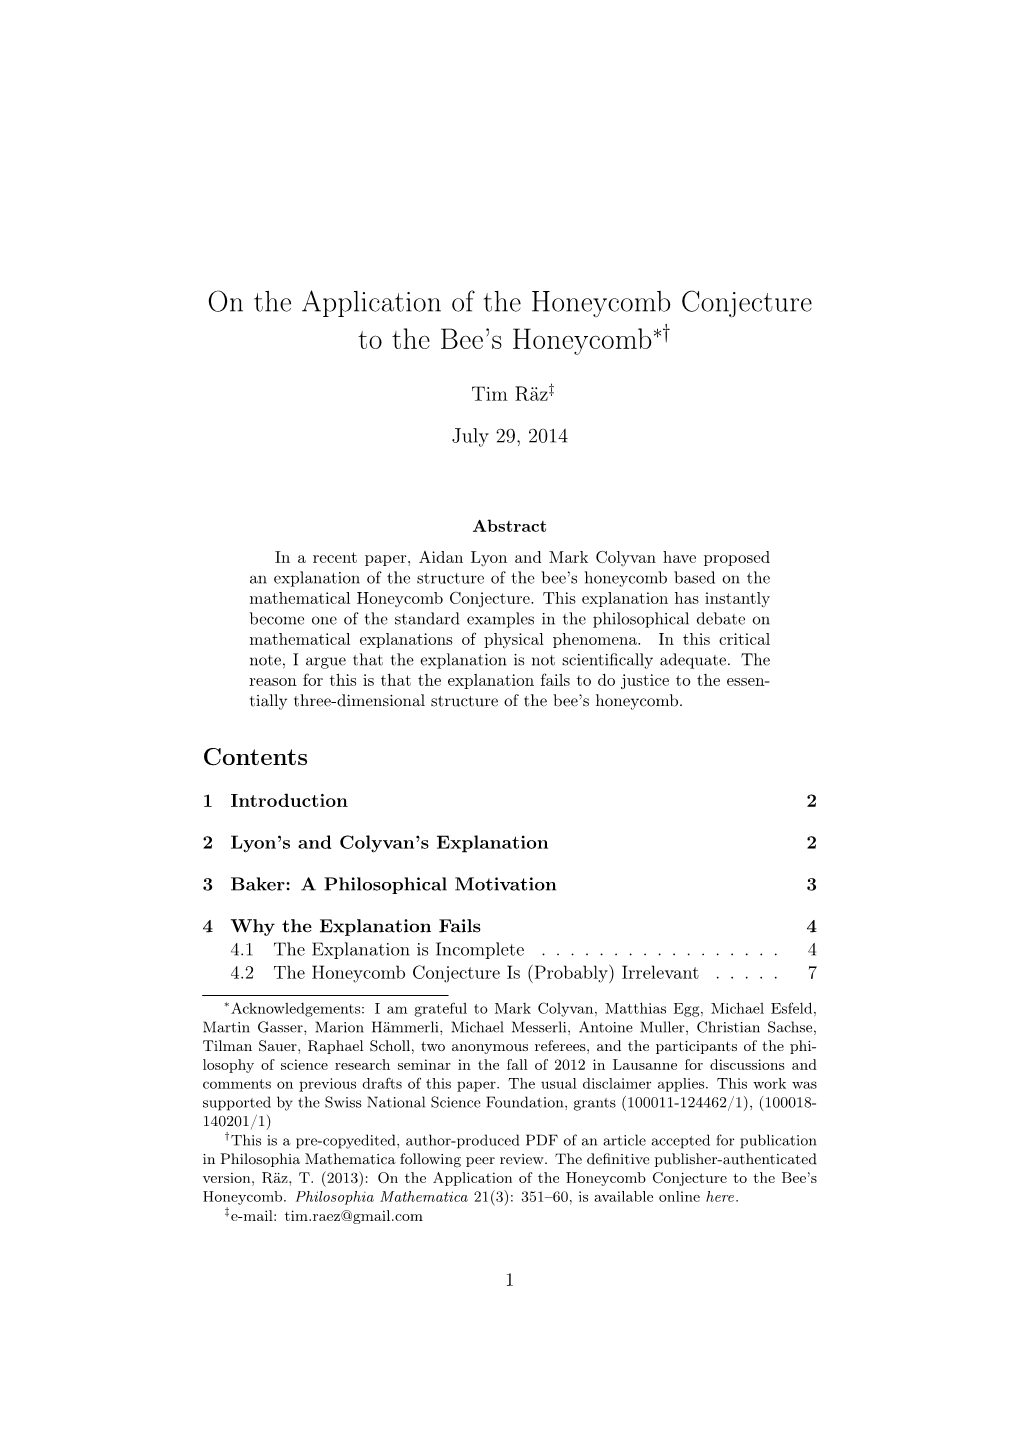 On the Application of the Honeycomb Conjecture to the Bee's Honeycomb